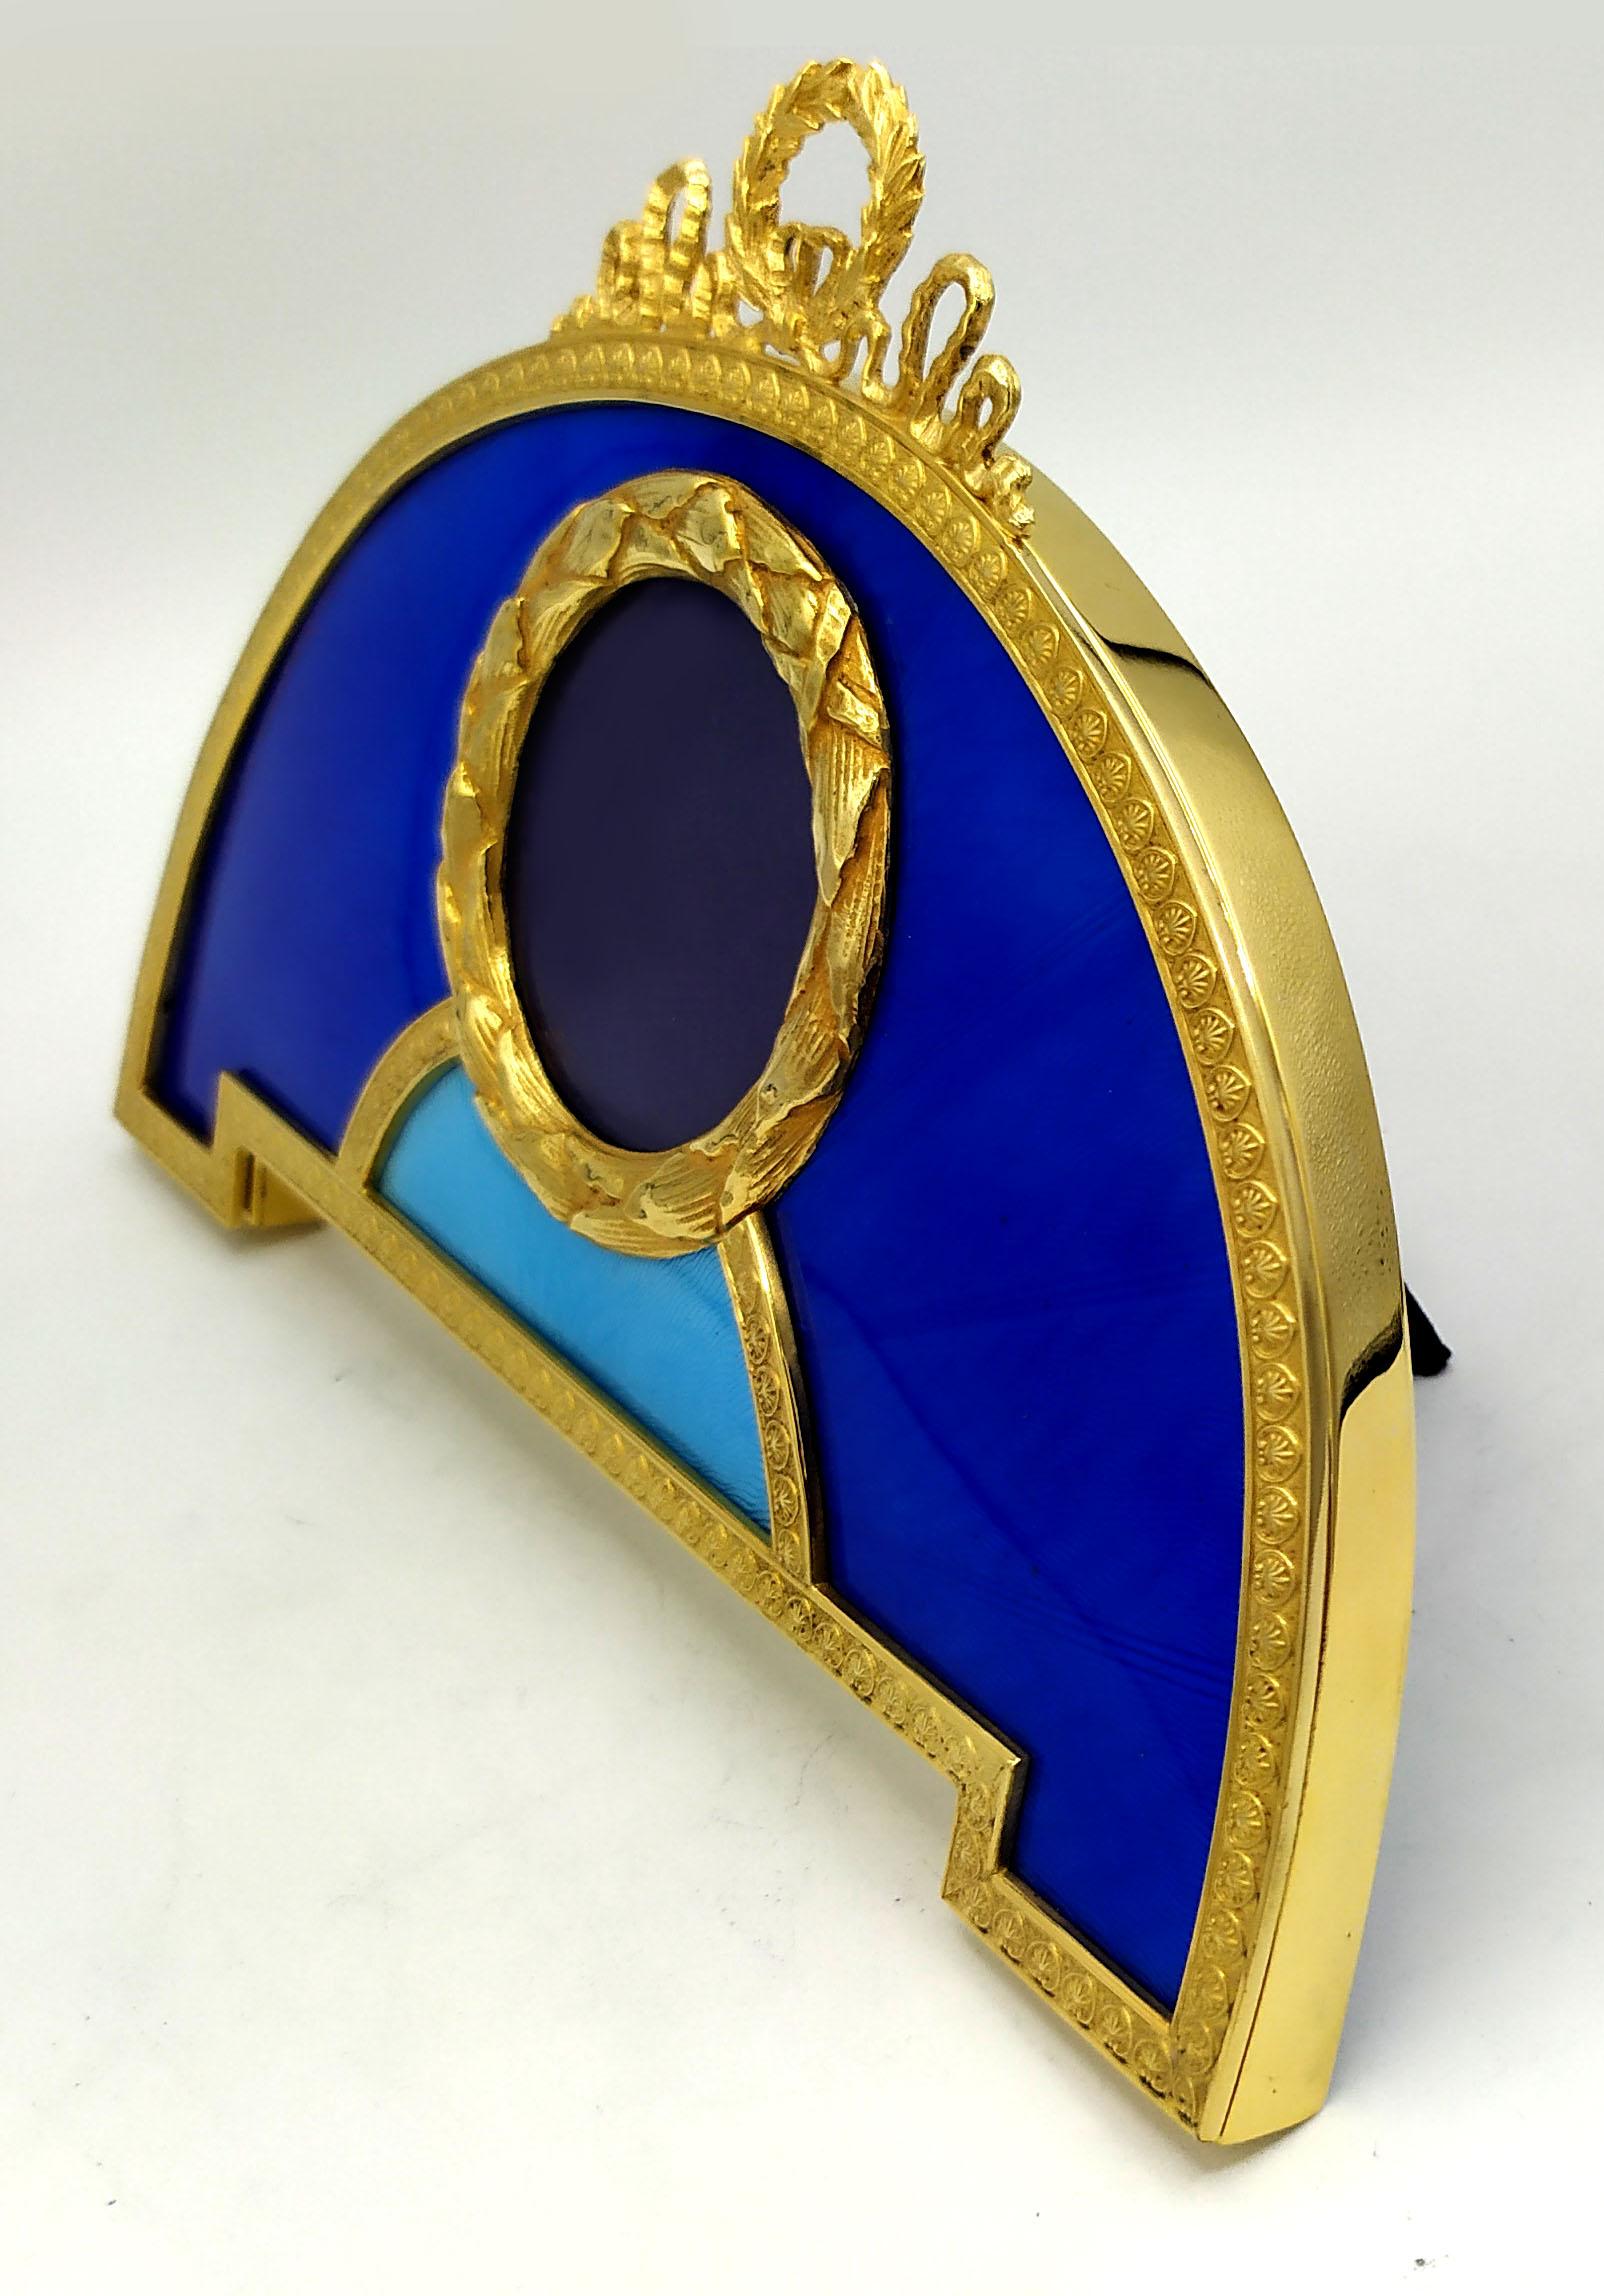 This admirable Picture Frame is in 925/1000 sterling silver.
it has a Fan shape with blue and sky color for the fire enameled surface on guilloche.
Picture Frame fan-shaped Napoleon III is gold plated 24 carats.
External dimensions cm. 12 x 19